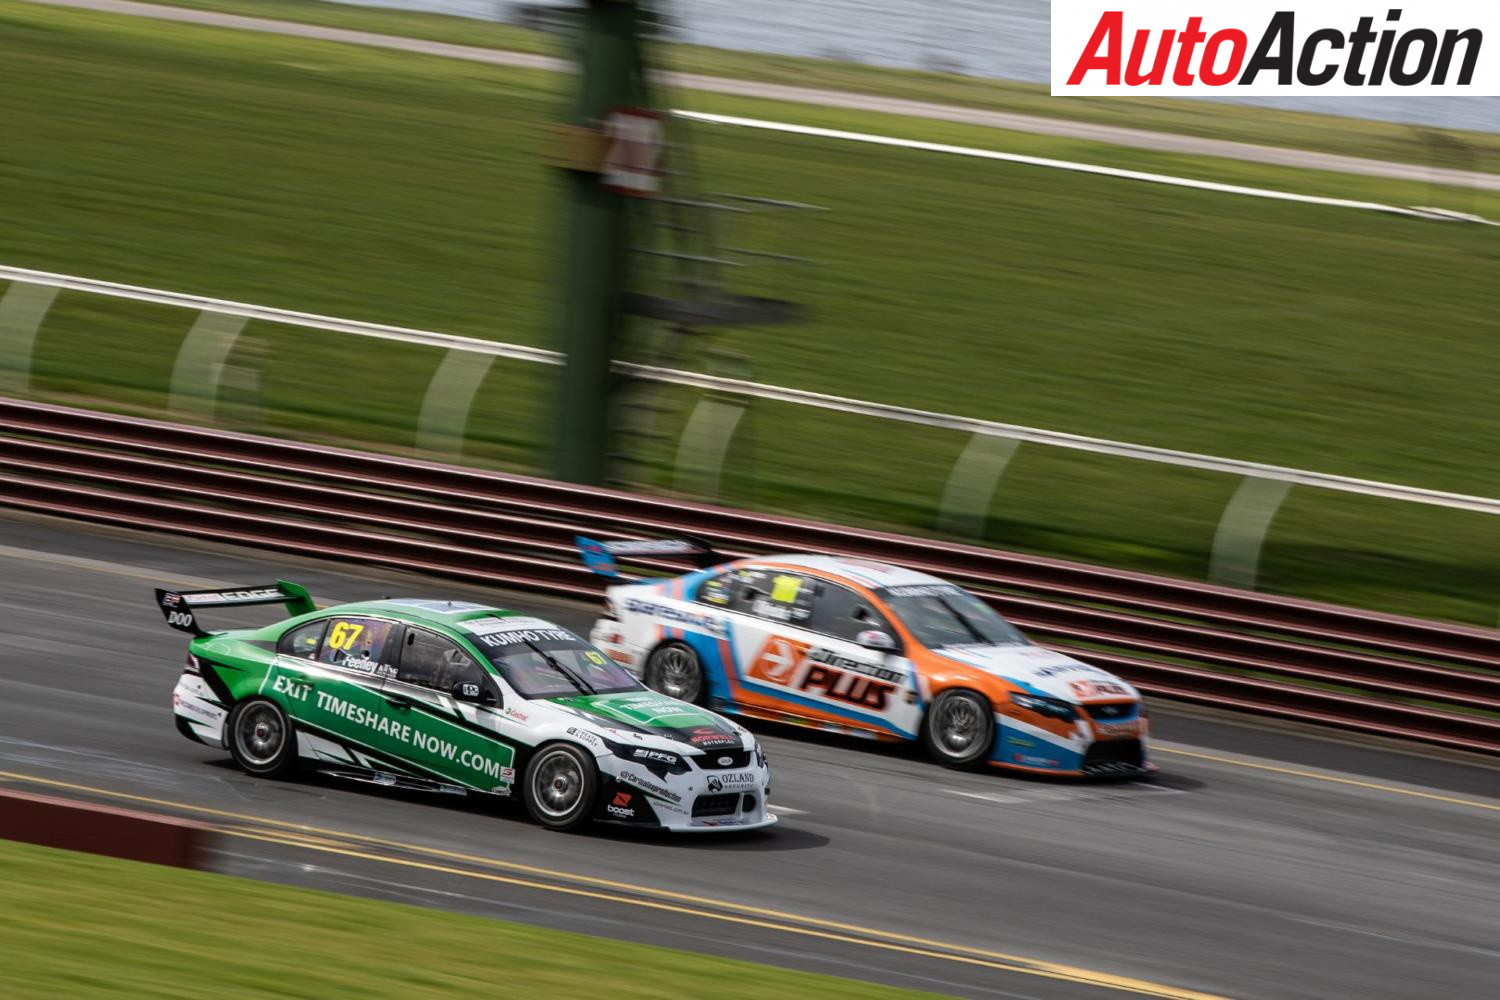 V8 TOURING CAR PRIZE POOL ANNOUNCED Auto Action